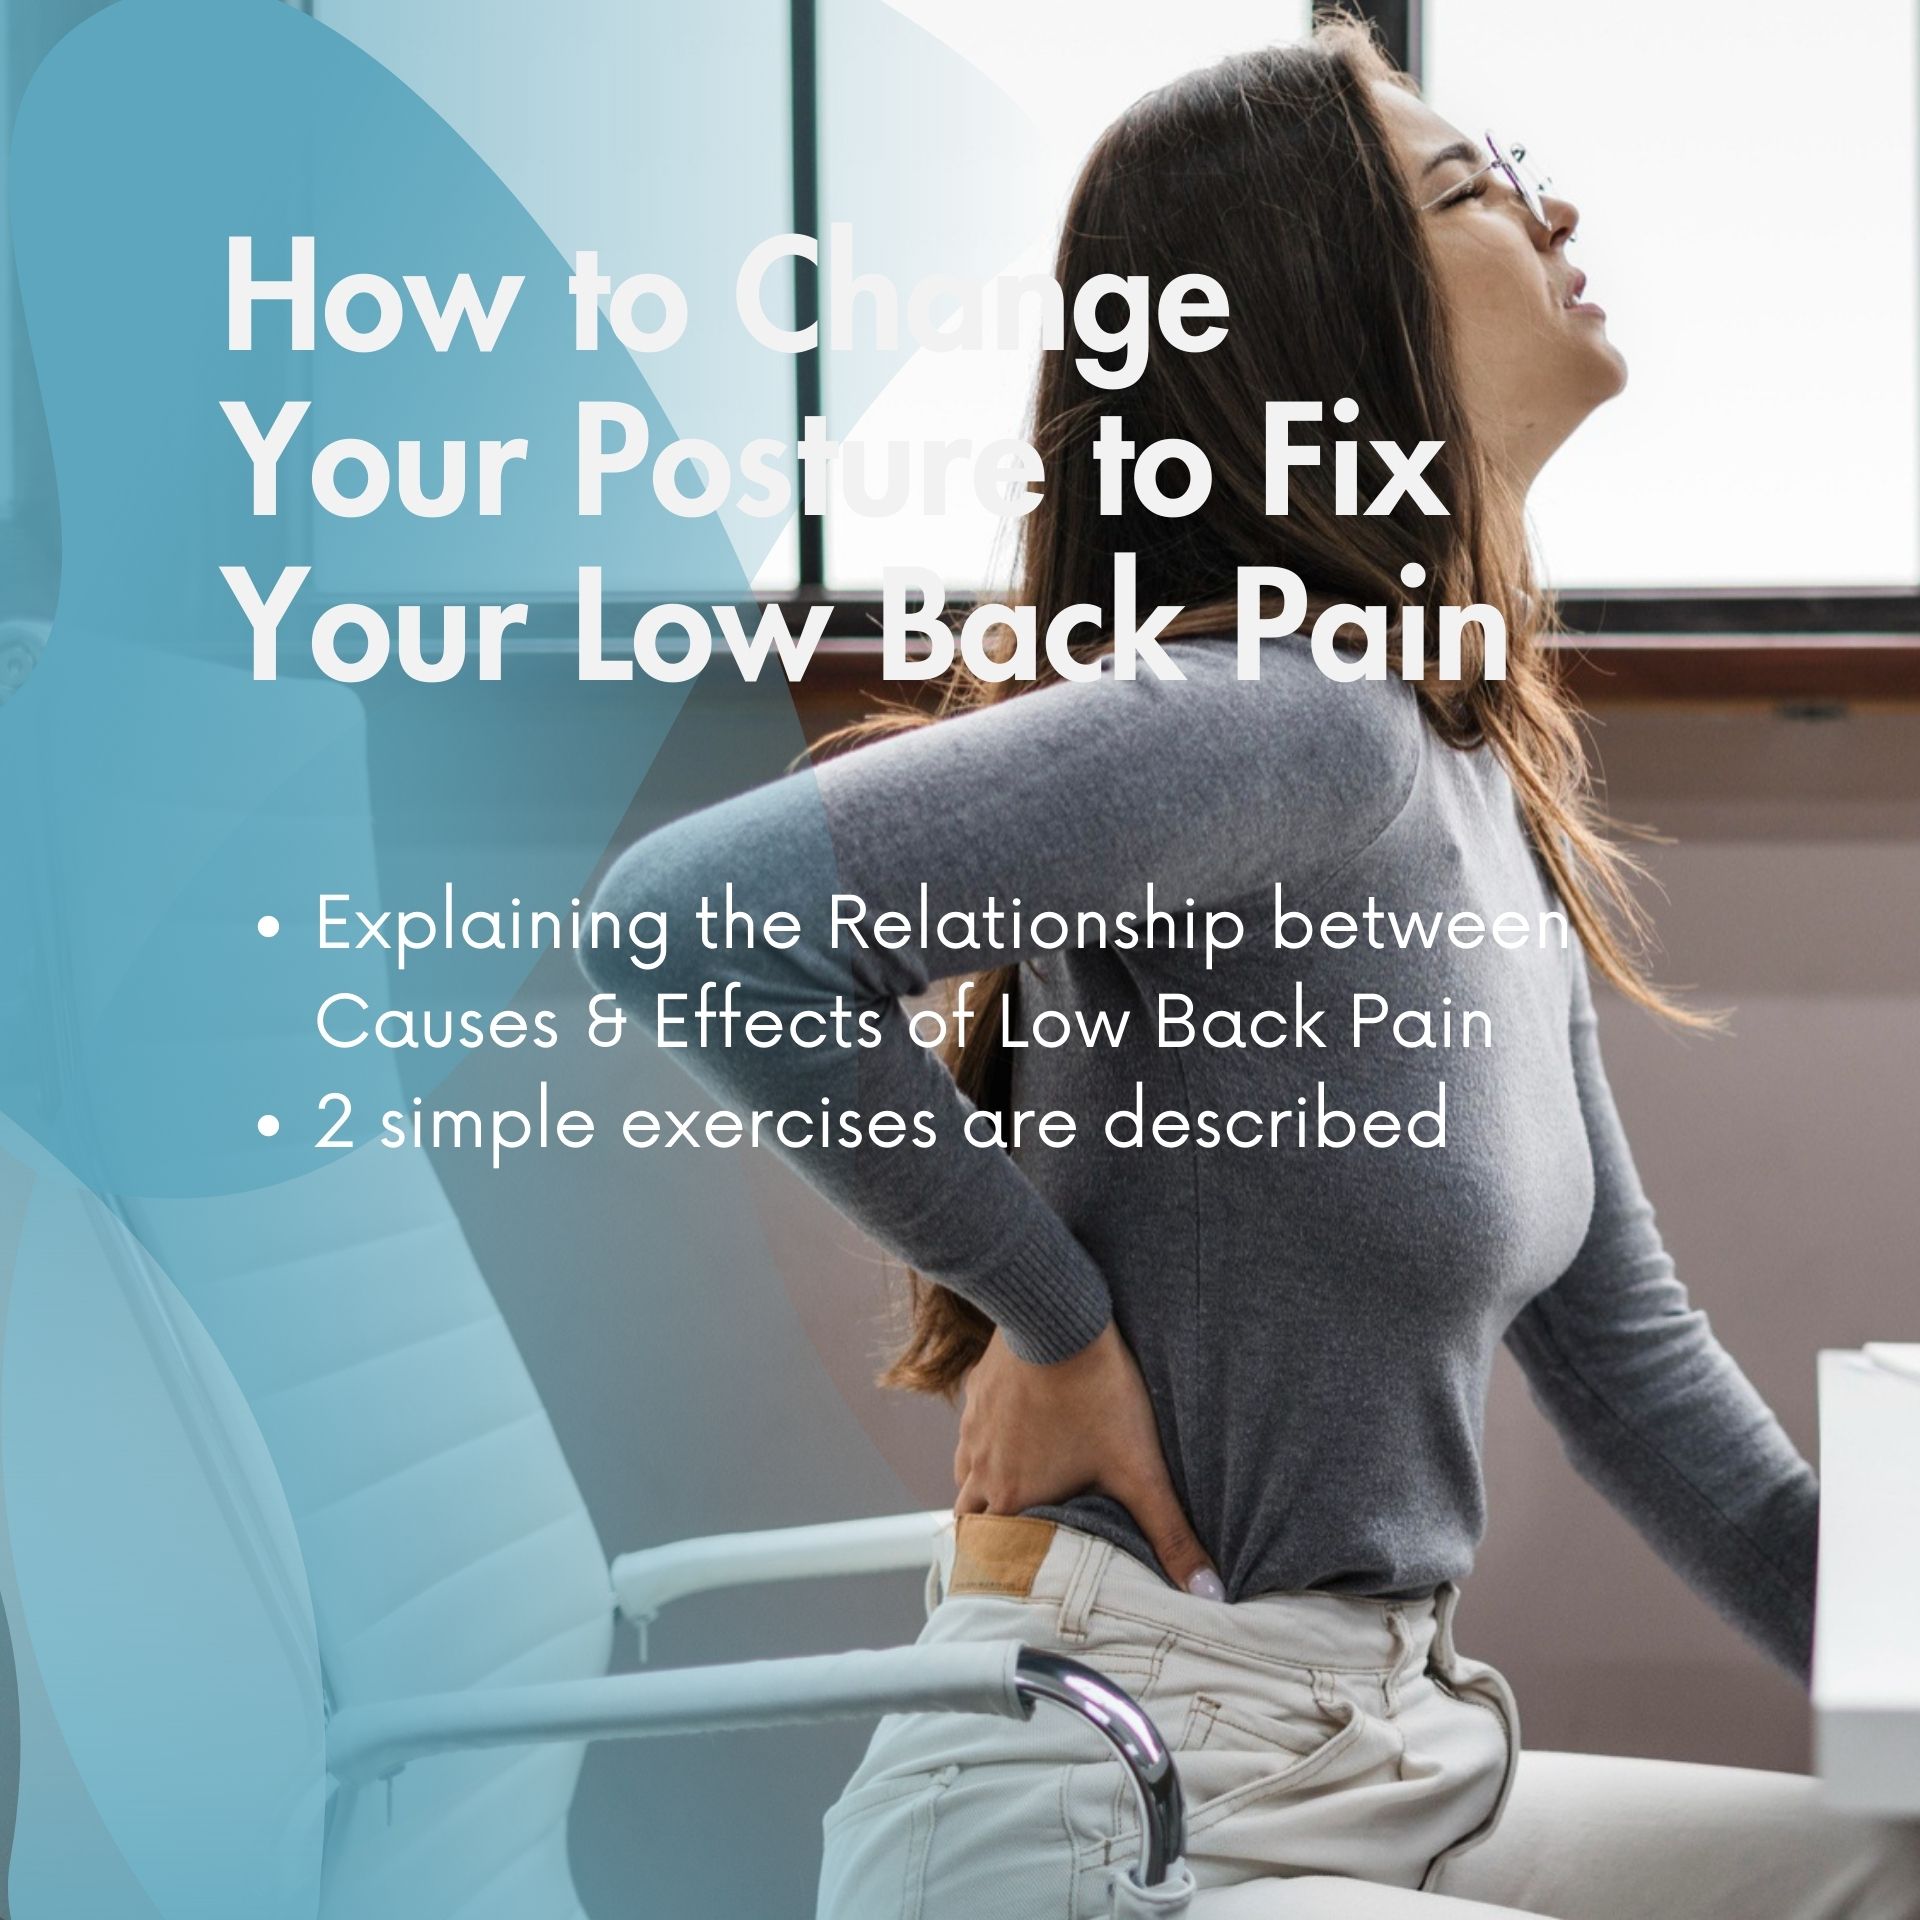 How to change your posture to fix your low back pain